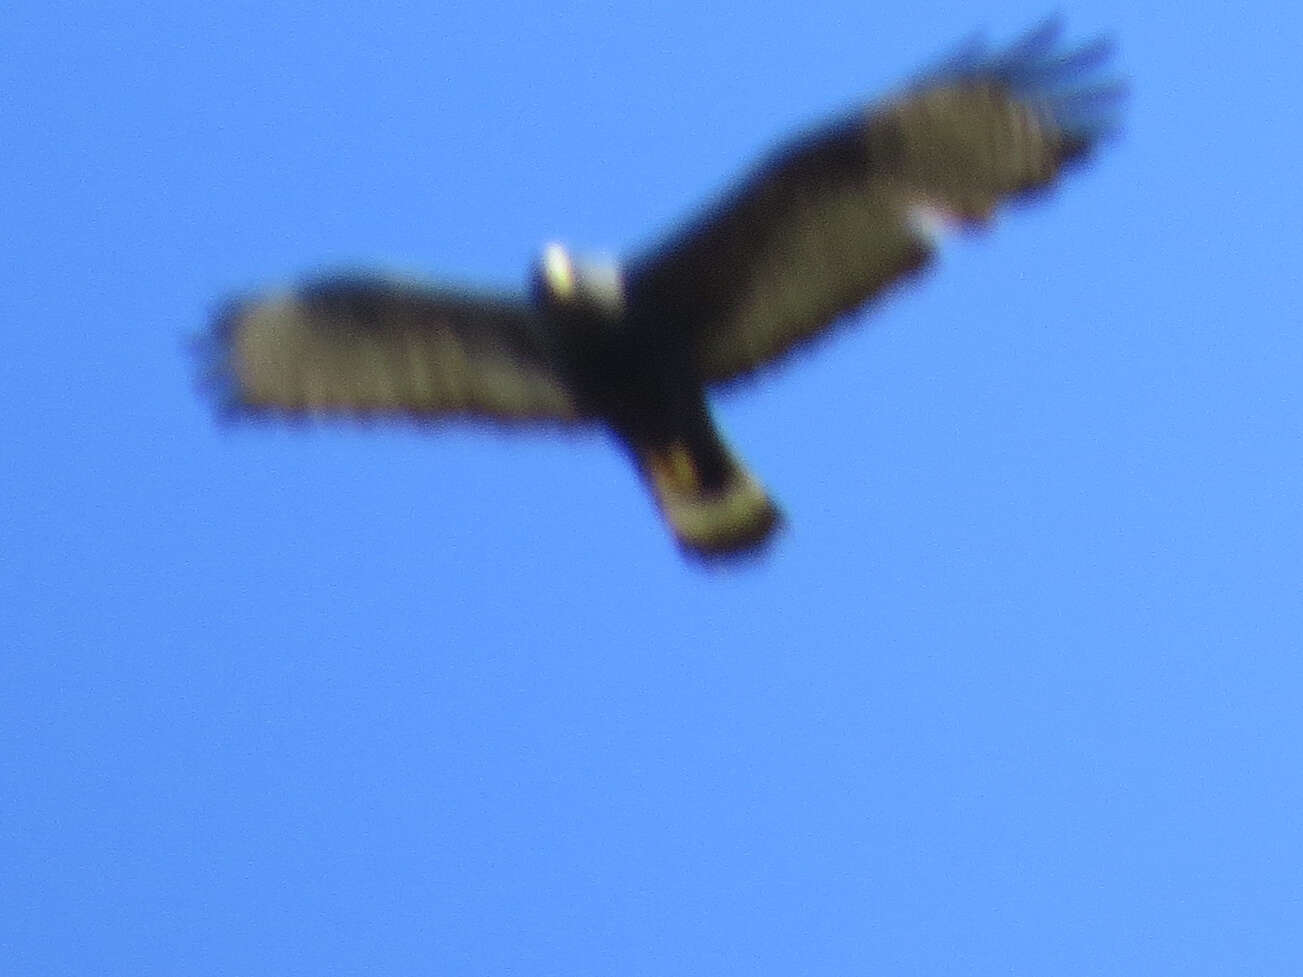 Image of Zone-tailed Hawk